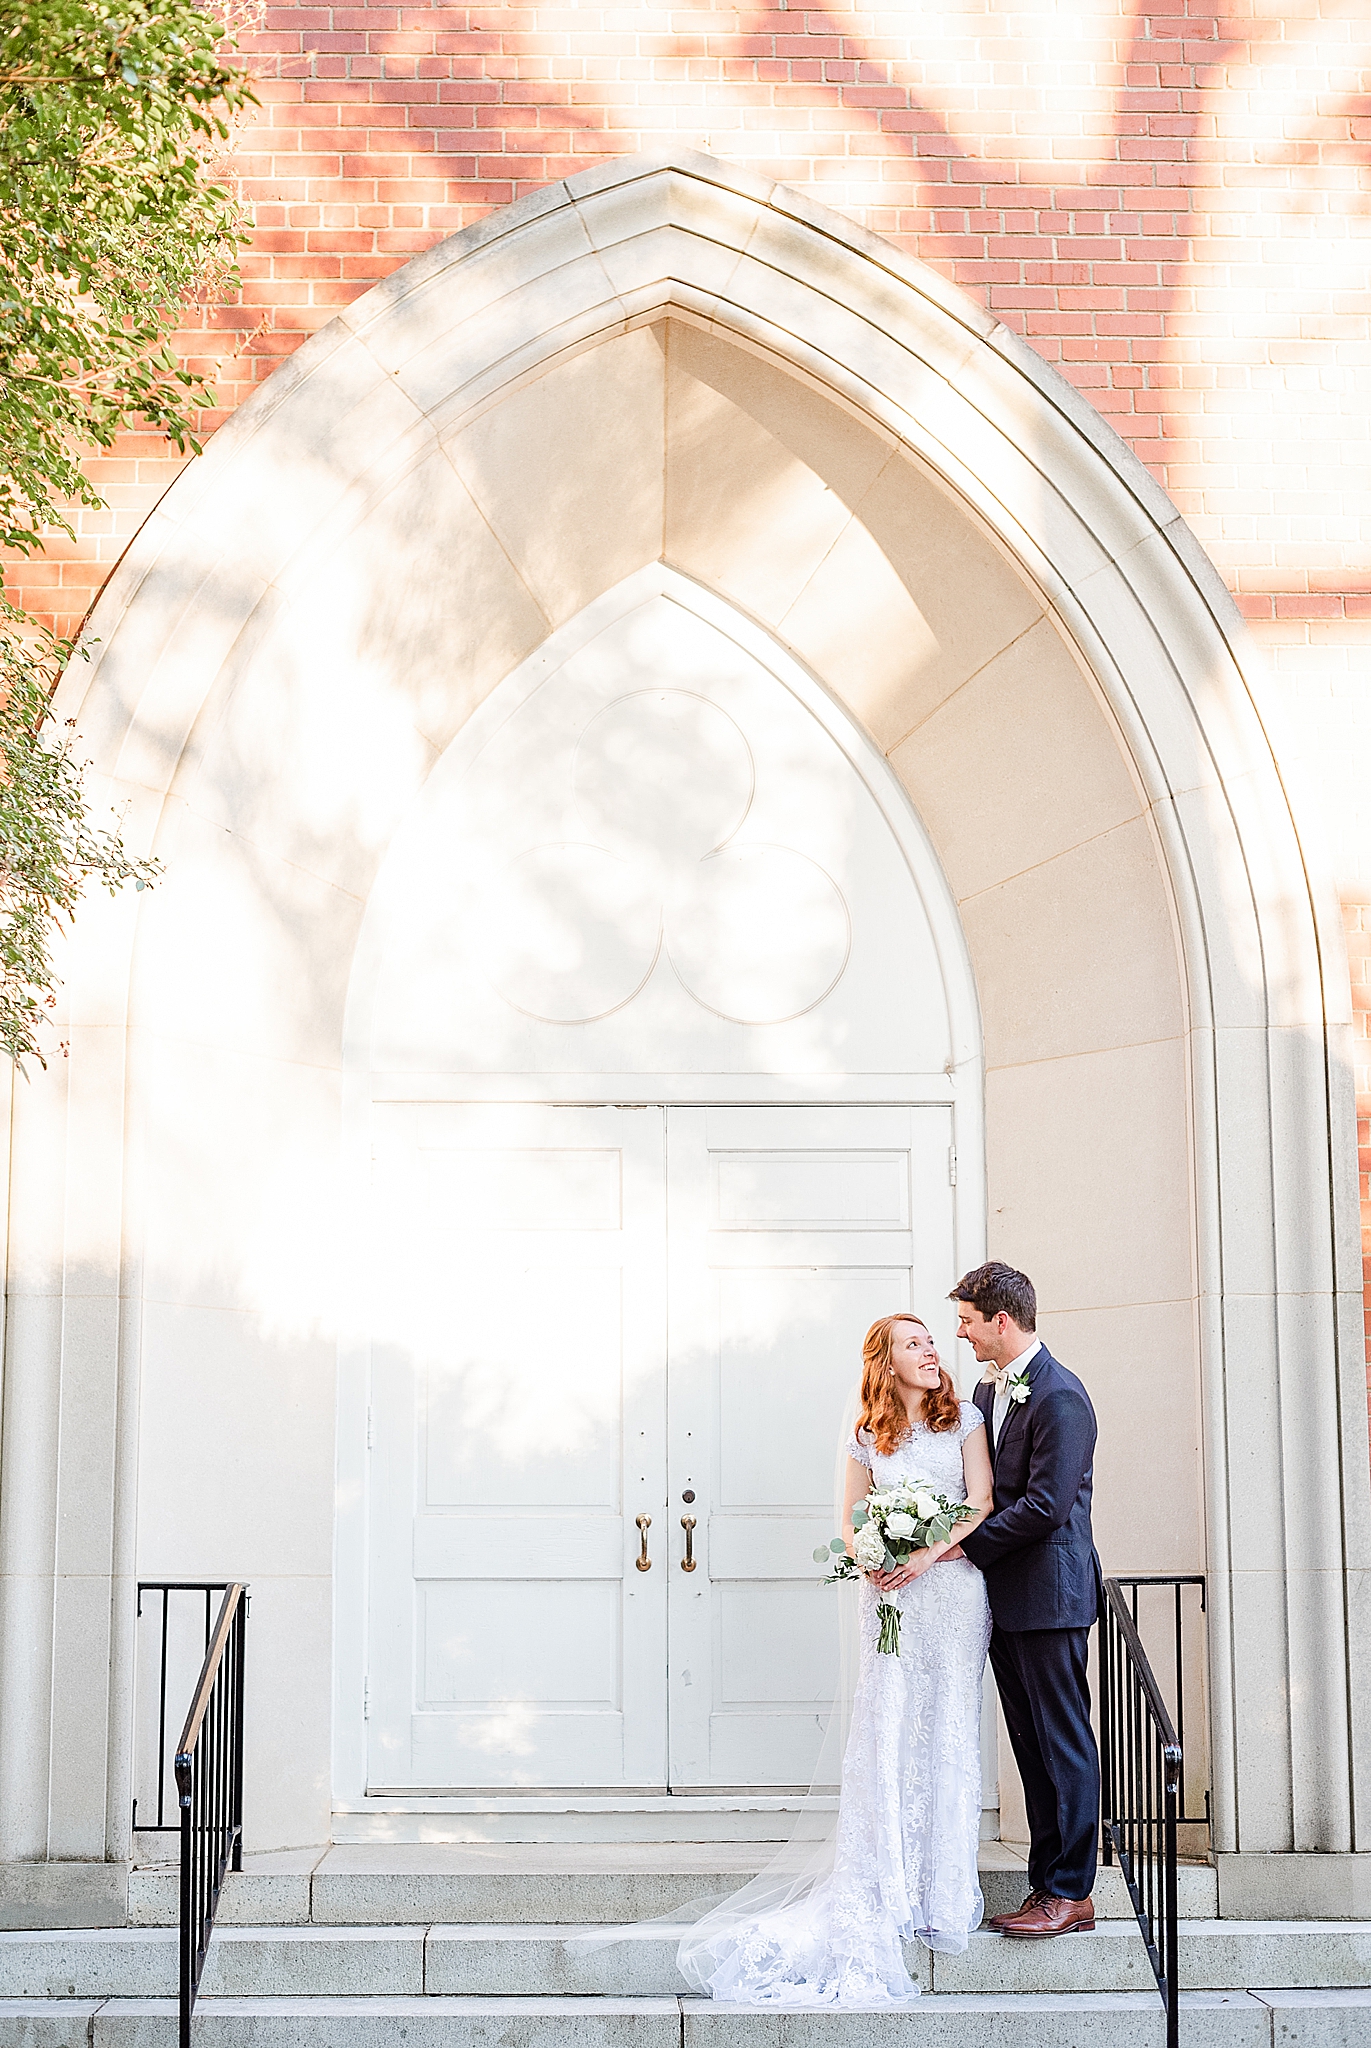 classic Southern wedding portraits on church steps by archway